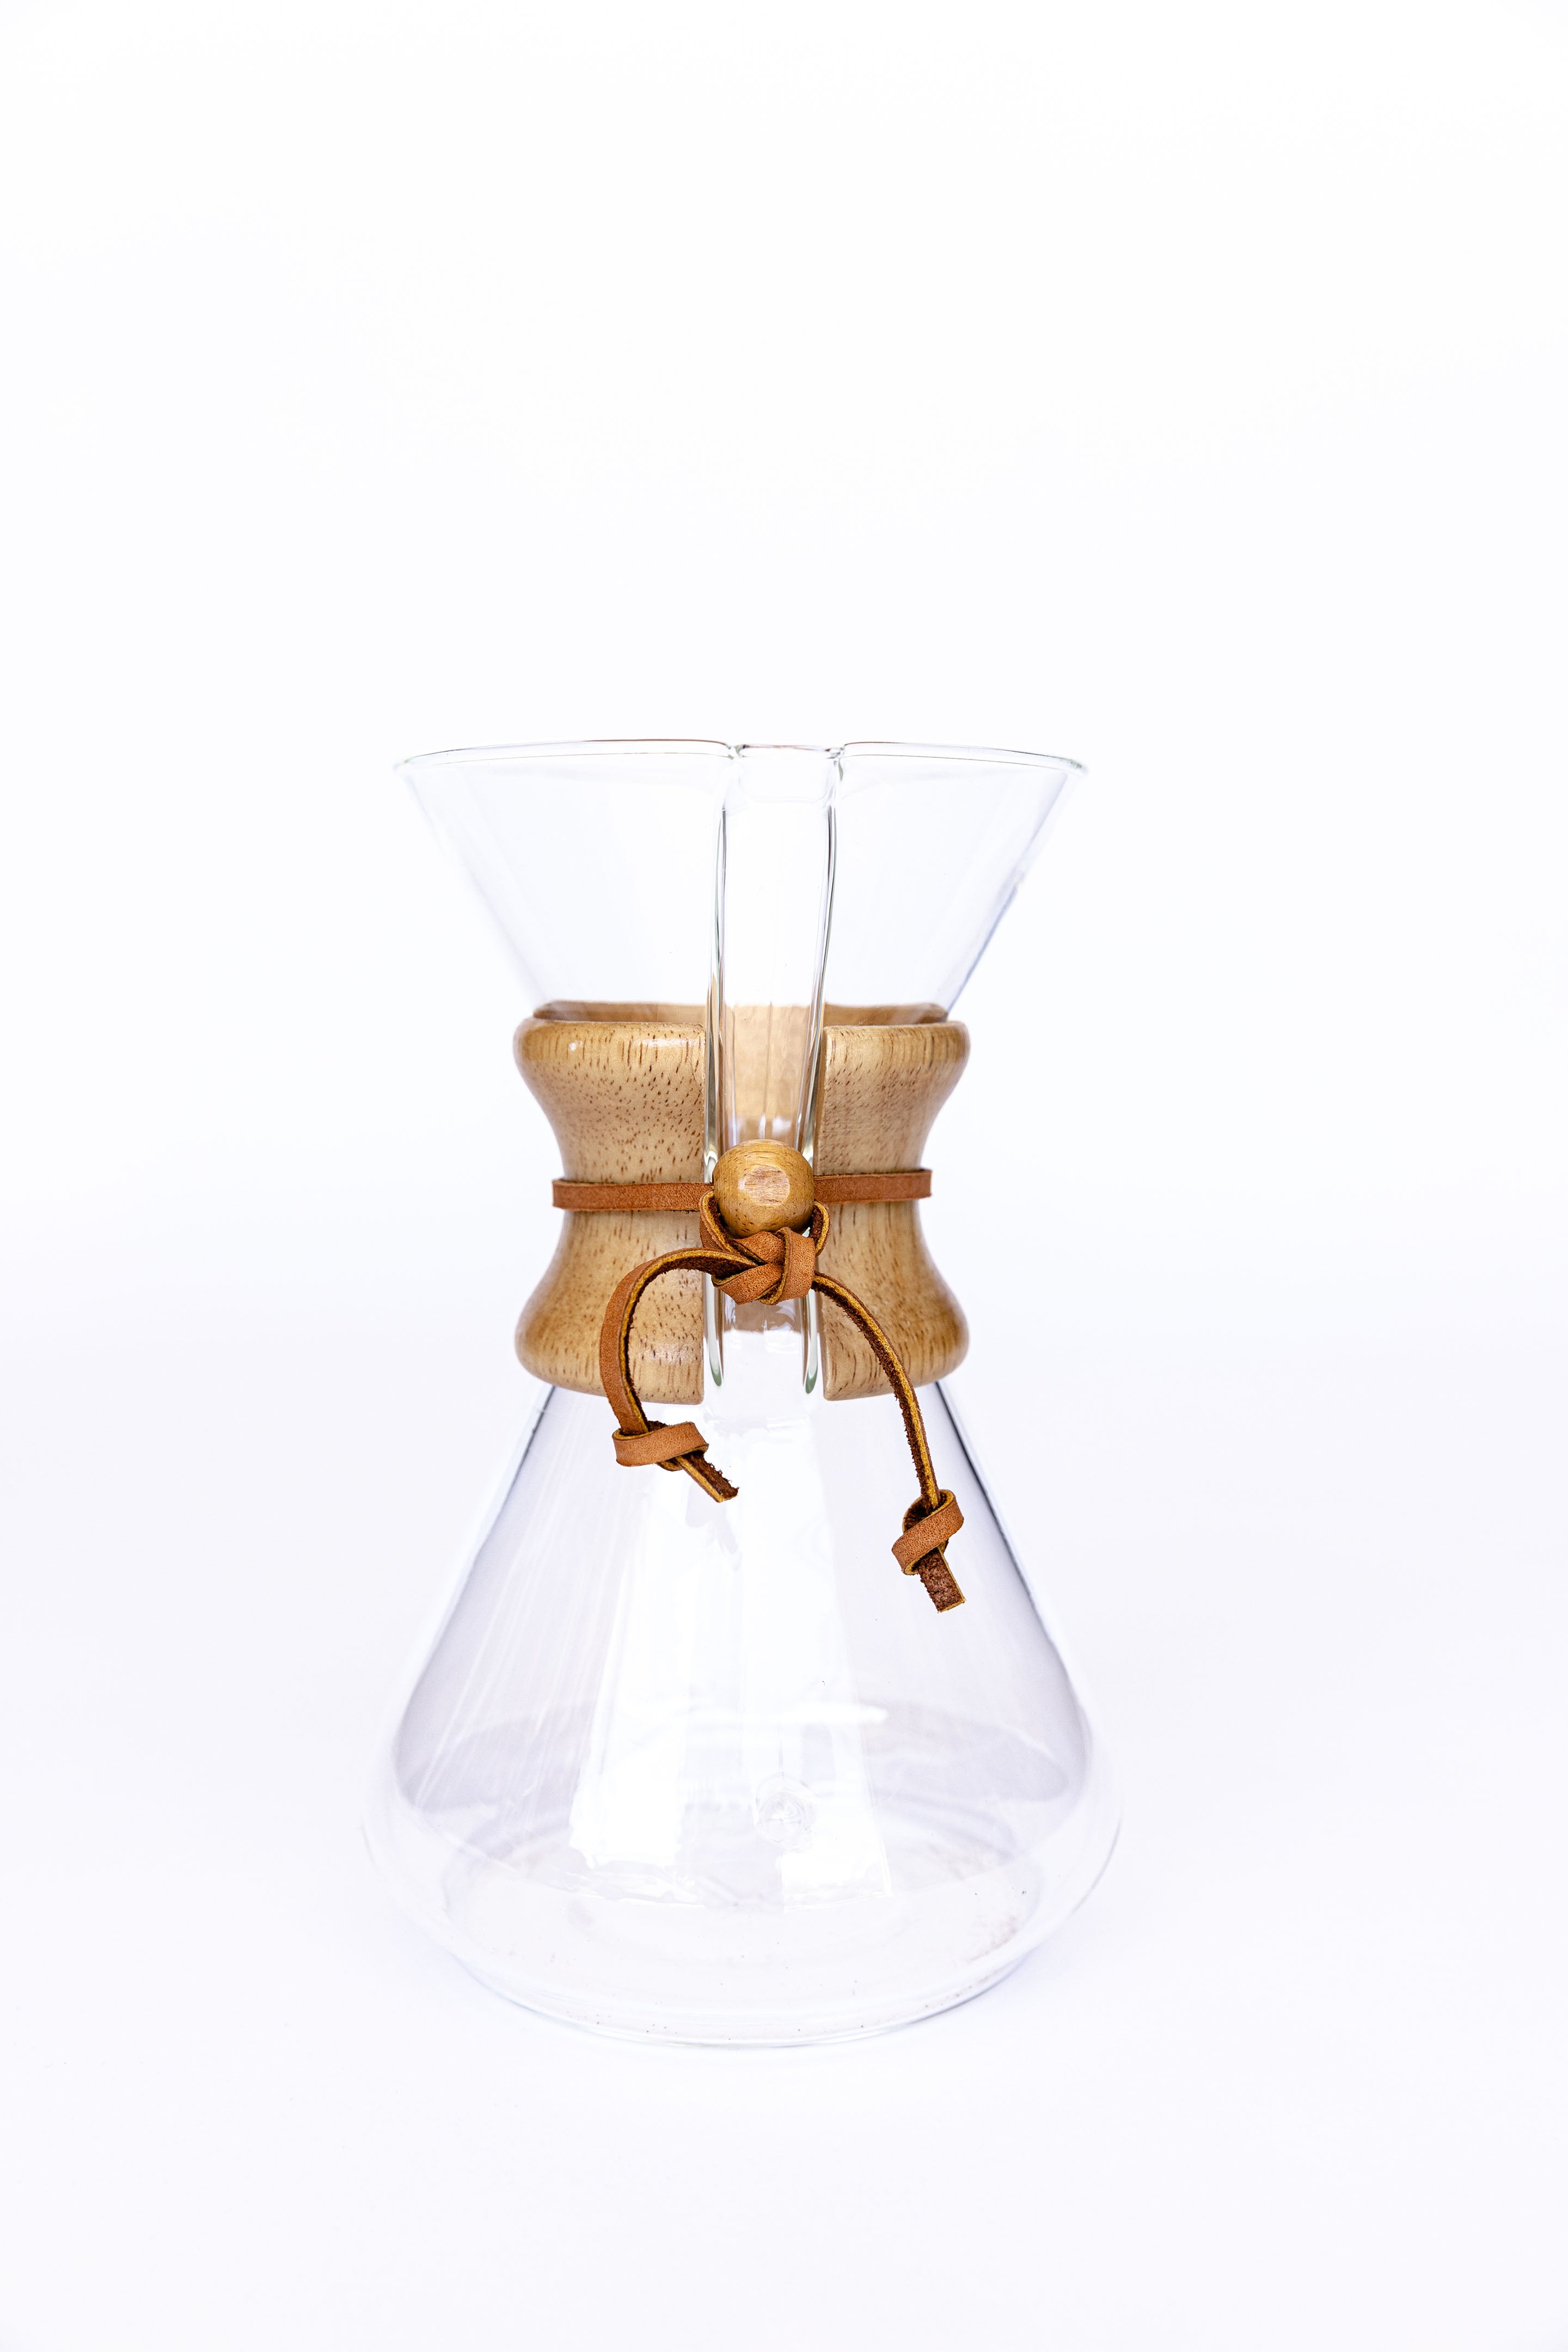 Chemex Glass Pour-over Coffee Maker | 6 Cup or 8 Cup